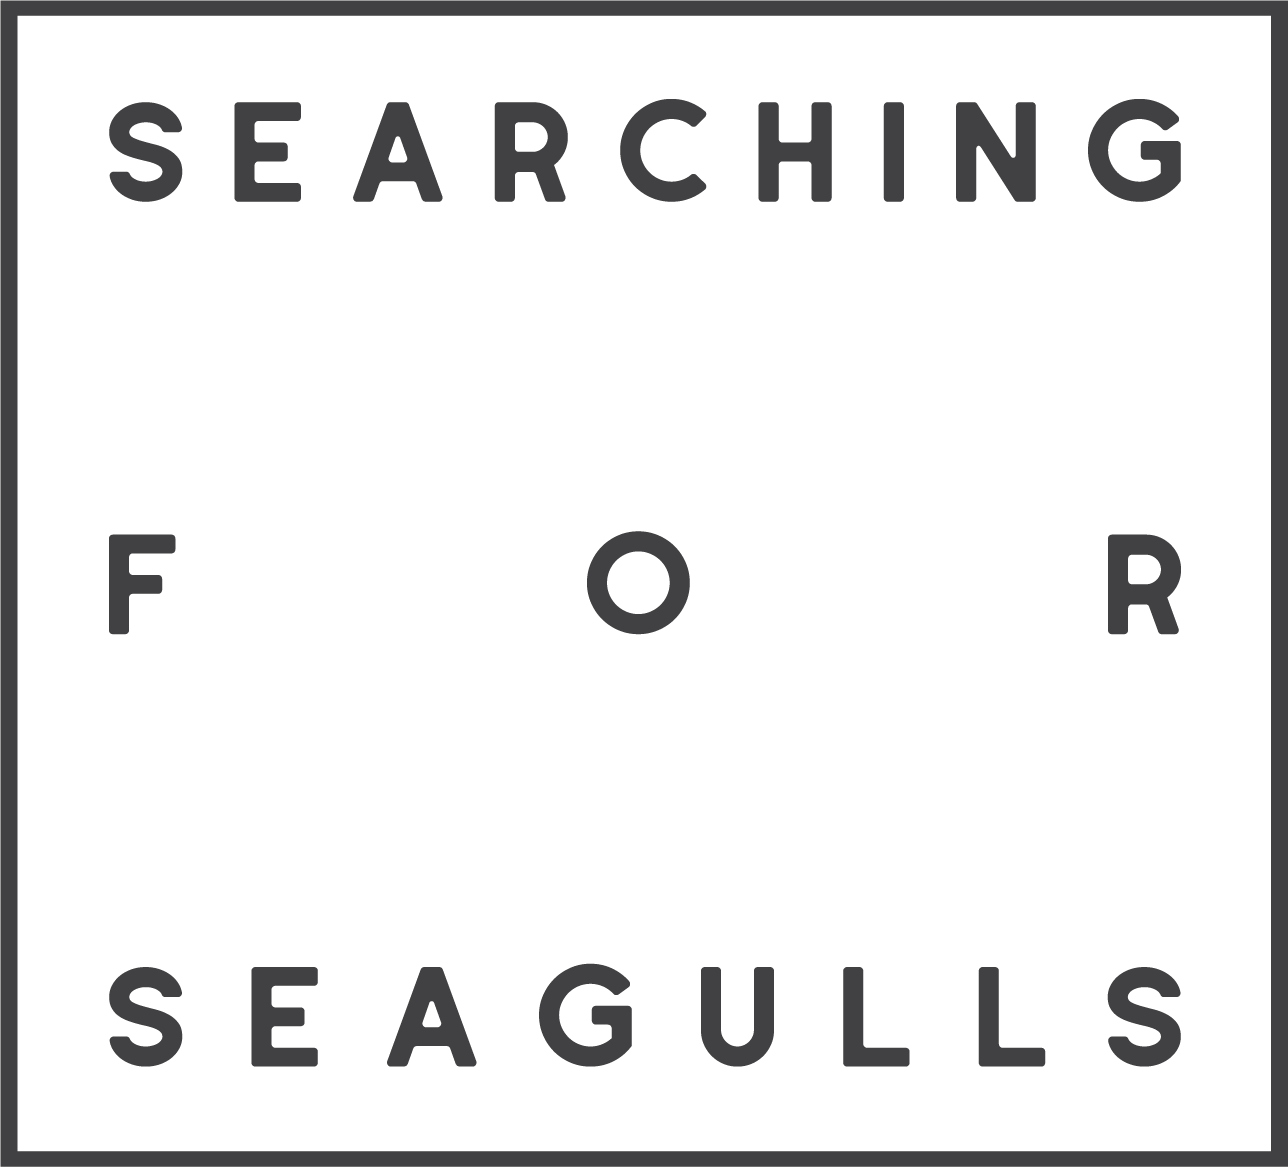 Searching For Seagulls